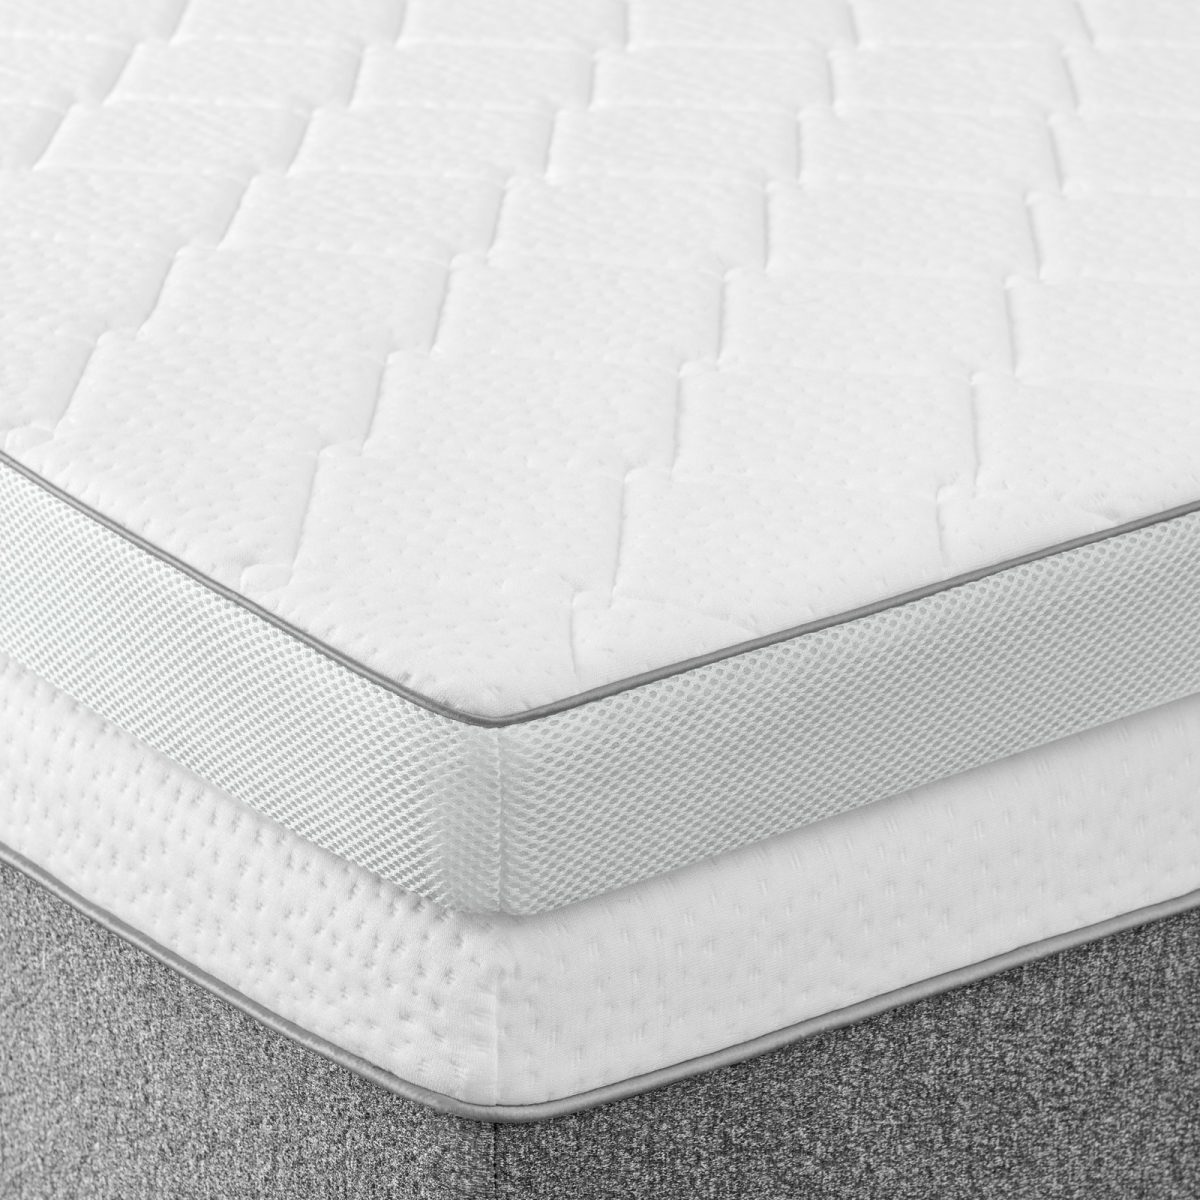 Panda Tf0009 3 In. Solace Sleep Quilted & Ventilated Memory Foam Slab Mattress Topper With Cover & Non Solid Bottom, Full